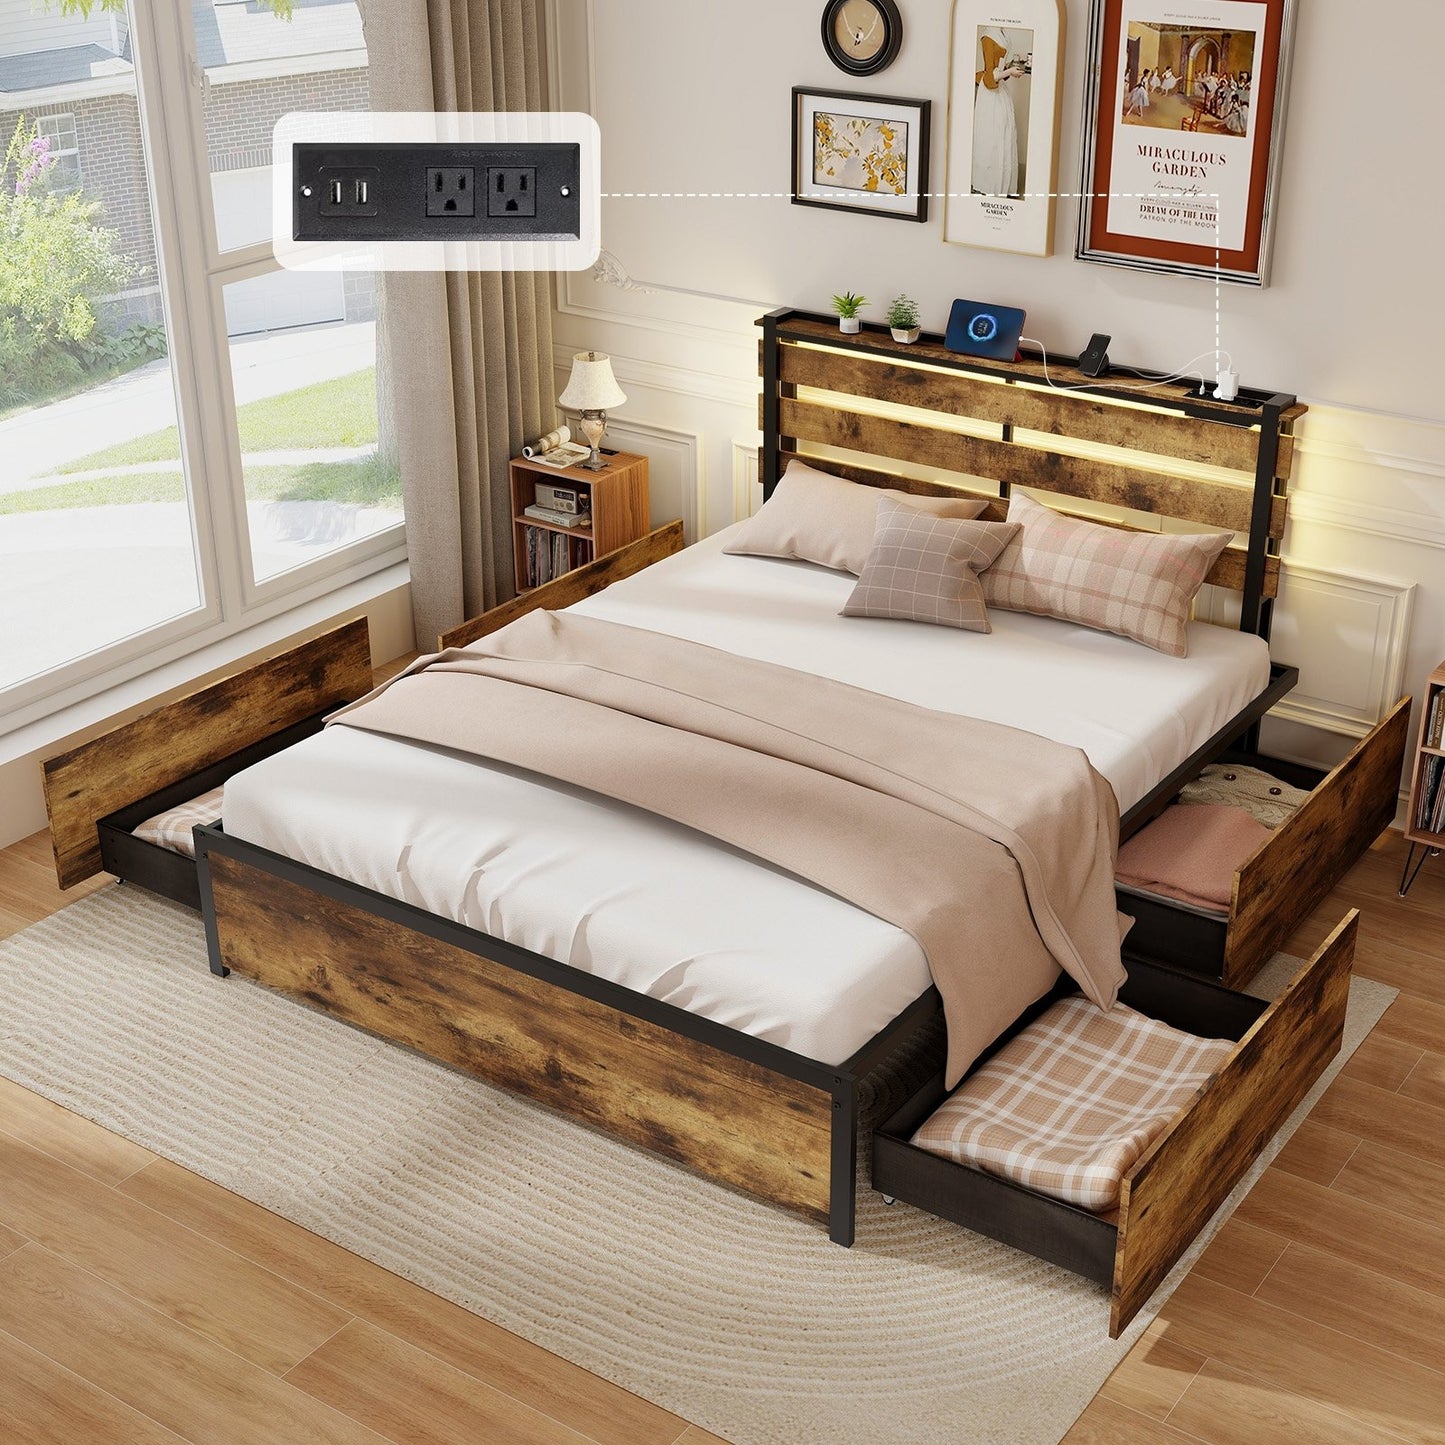 Full/Queen/Twin Size Bed Frame with Drawers LED Lights and USB Ports-Queen Size, Rustic Brown